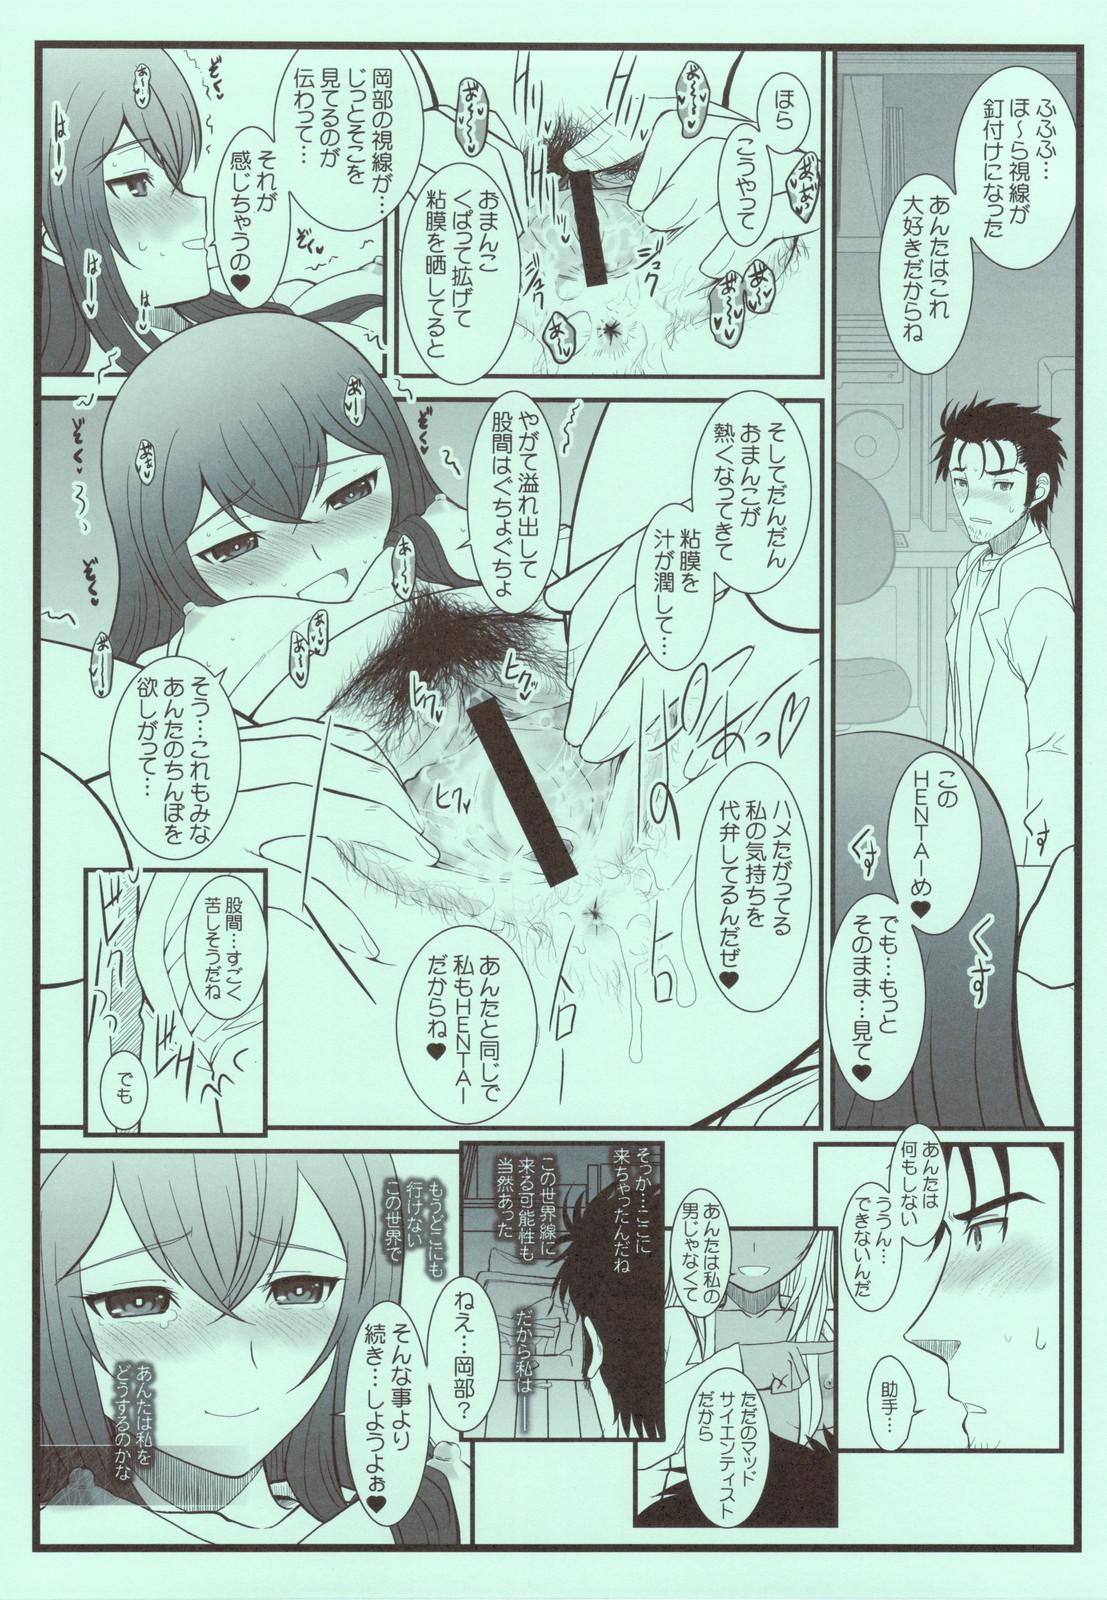 Gag BEAST FROM THE SUMINOE - Steinsgate Fucking - Page 5